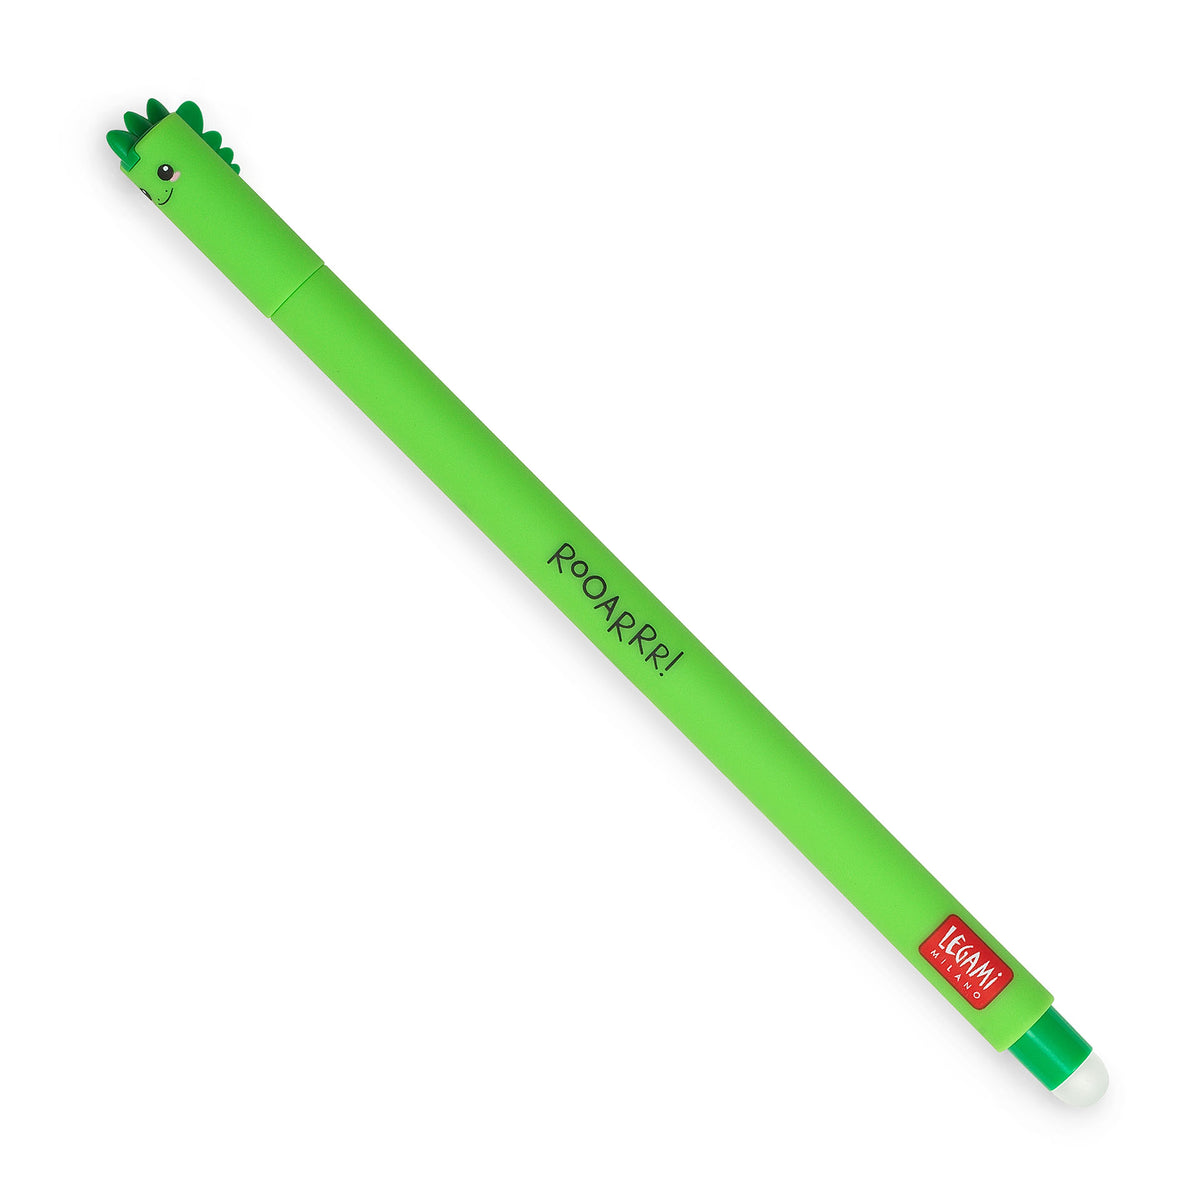 An image of a green coloured erasable pen by Legami. The cap of the pen is like the head of a dinosaur with dinosaur crest formed on the top and sides. It has an erasable ball at the other end of the pen.